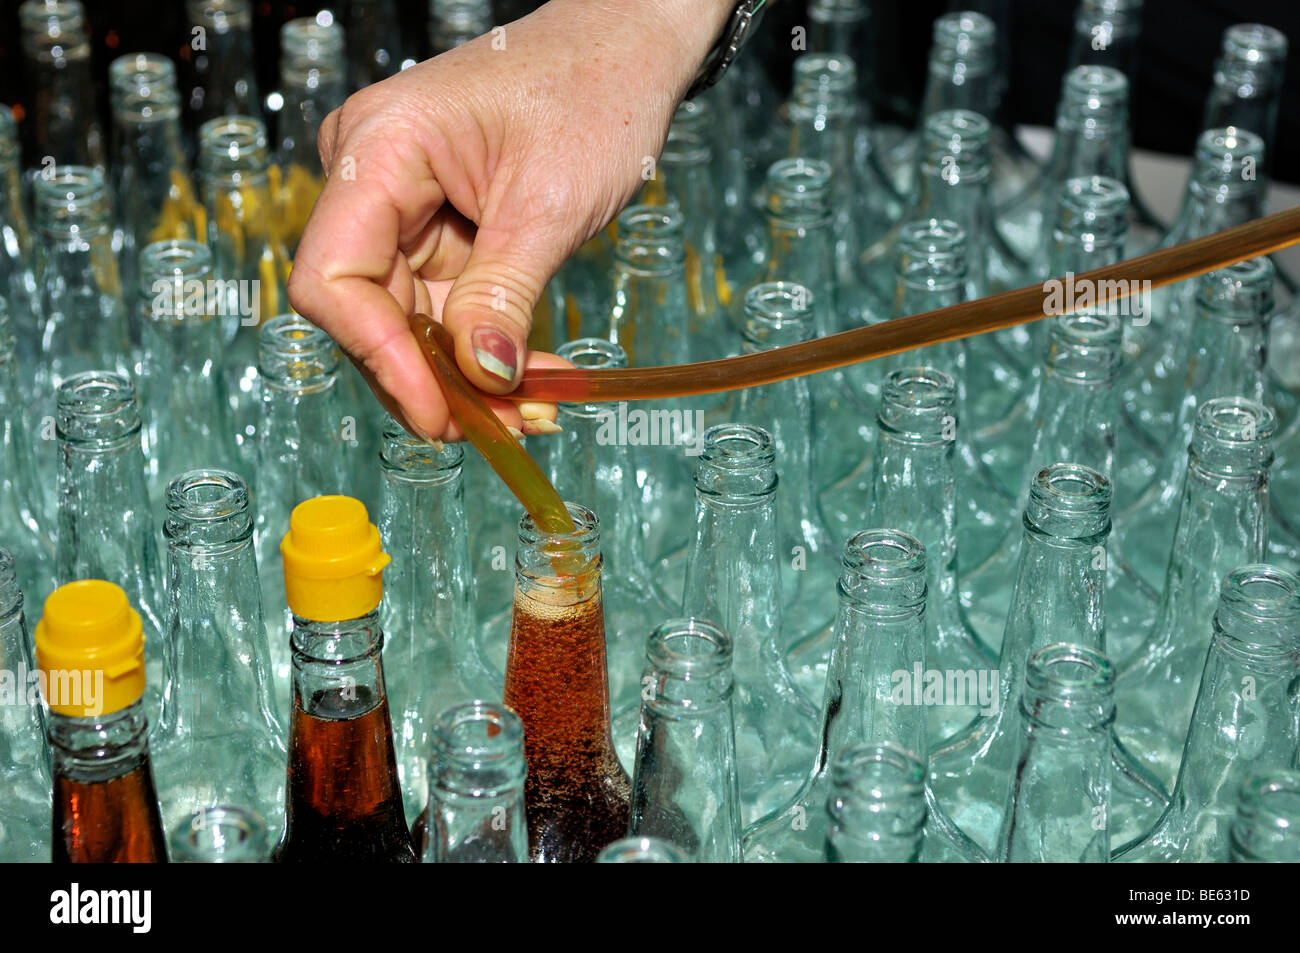 Bottling of the traditional Vietnamese fish sauce Nuoc Mam in glass bottles with yellow plastic cap, Phu Quoc, Vietnam, Asia Stock Photo